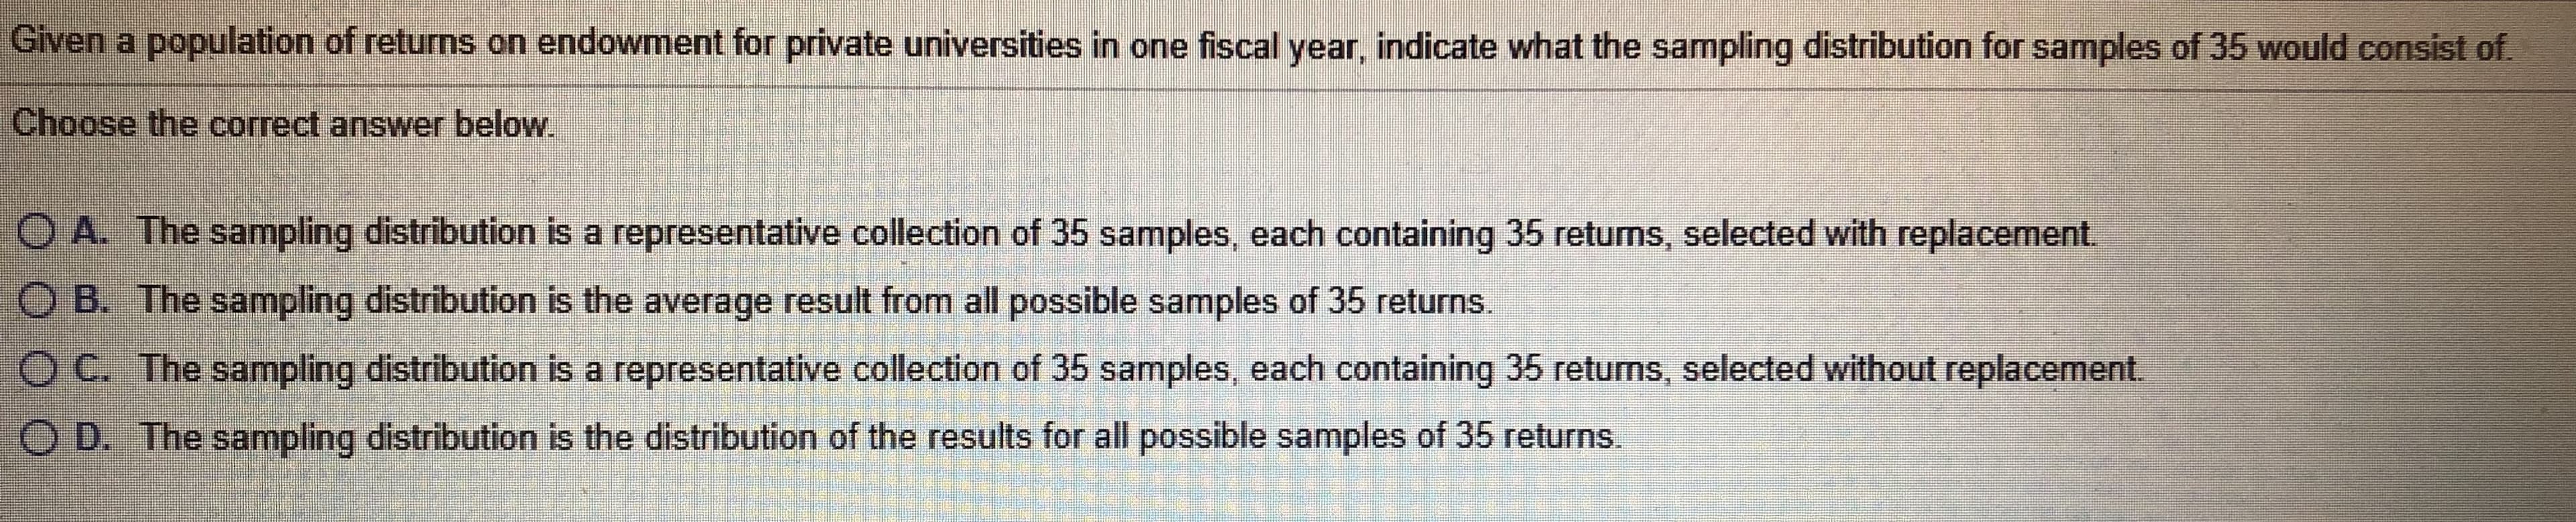 Given a population of returns on endowment for private universities in one fiscal year, indicate what the sampling distribution for samples of 35 Would consist of.
Choose the correct answer below.
O A. The sampling distribution is a representative collection of 35 samples, each containing 35 returms, selected with replacement.
O B. The sampling distribution is the average result from all possible samples of 35 returns.
O C. The sampling distribution is a representative collection of 35 samples, each containing 35 returns, selected without replacement.
O D. The sampling distribution is the distribution of the results for all possible samples of 35 returns.
